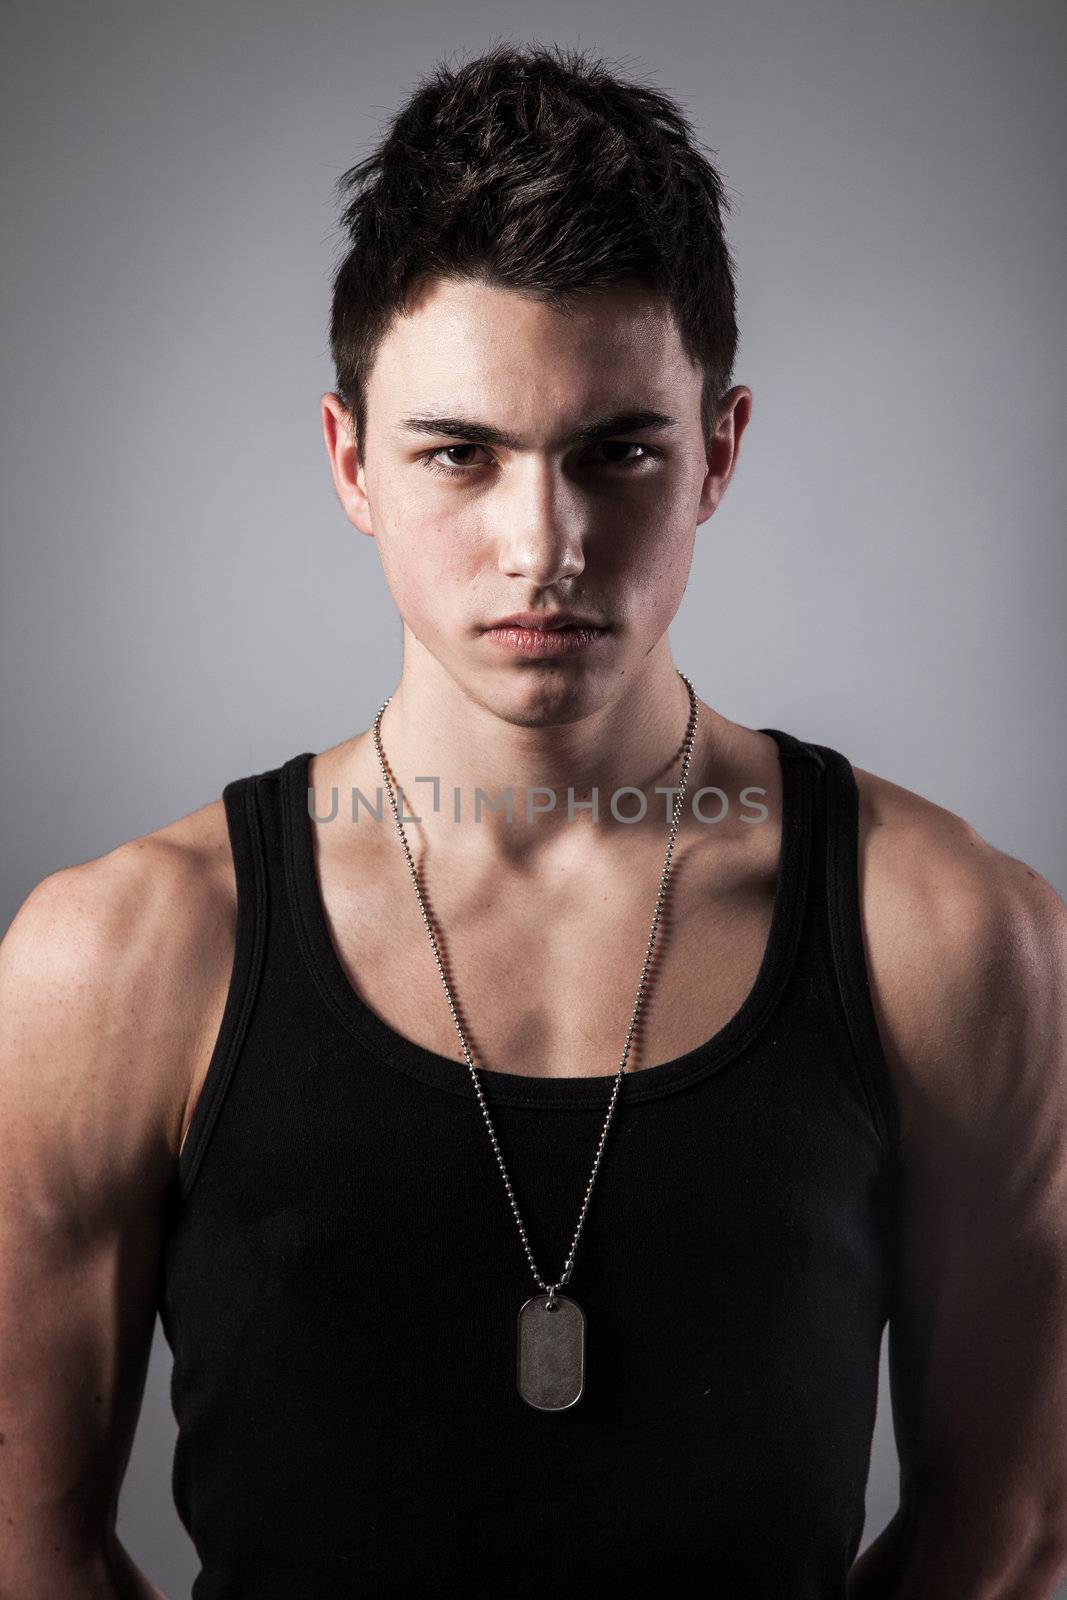 A good looking, muscular built, man on a black background with dog tags.